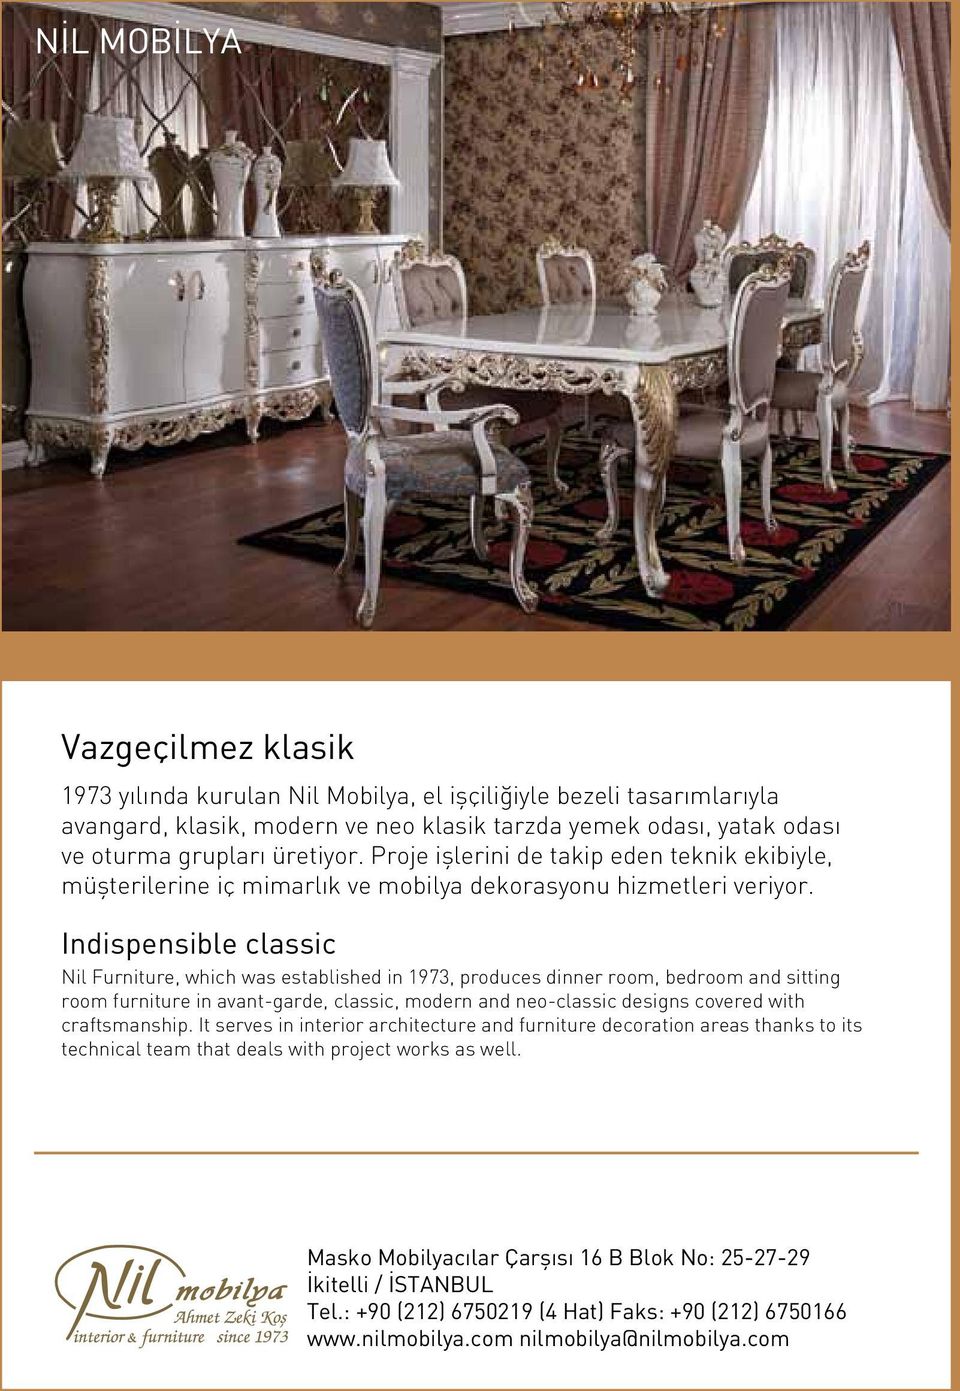 Indispensible classic Nil Furniture, which was established in 1973, produces dinner room, bedroom and sitting room furniture in avant-garde, classic, modern and neo-classic designs covered with